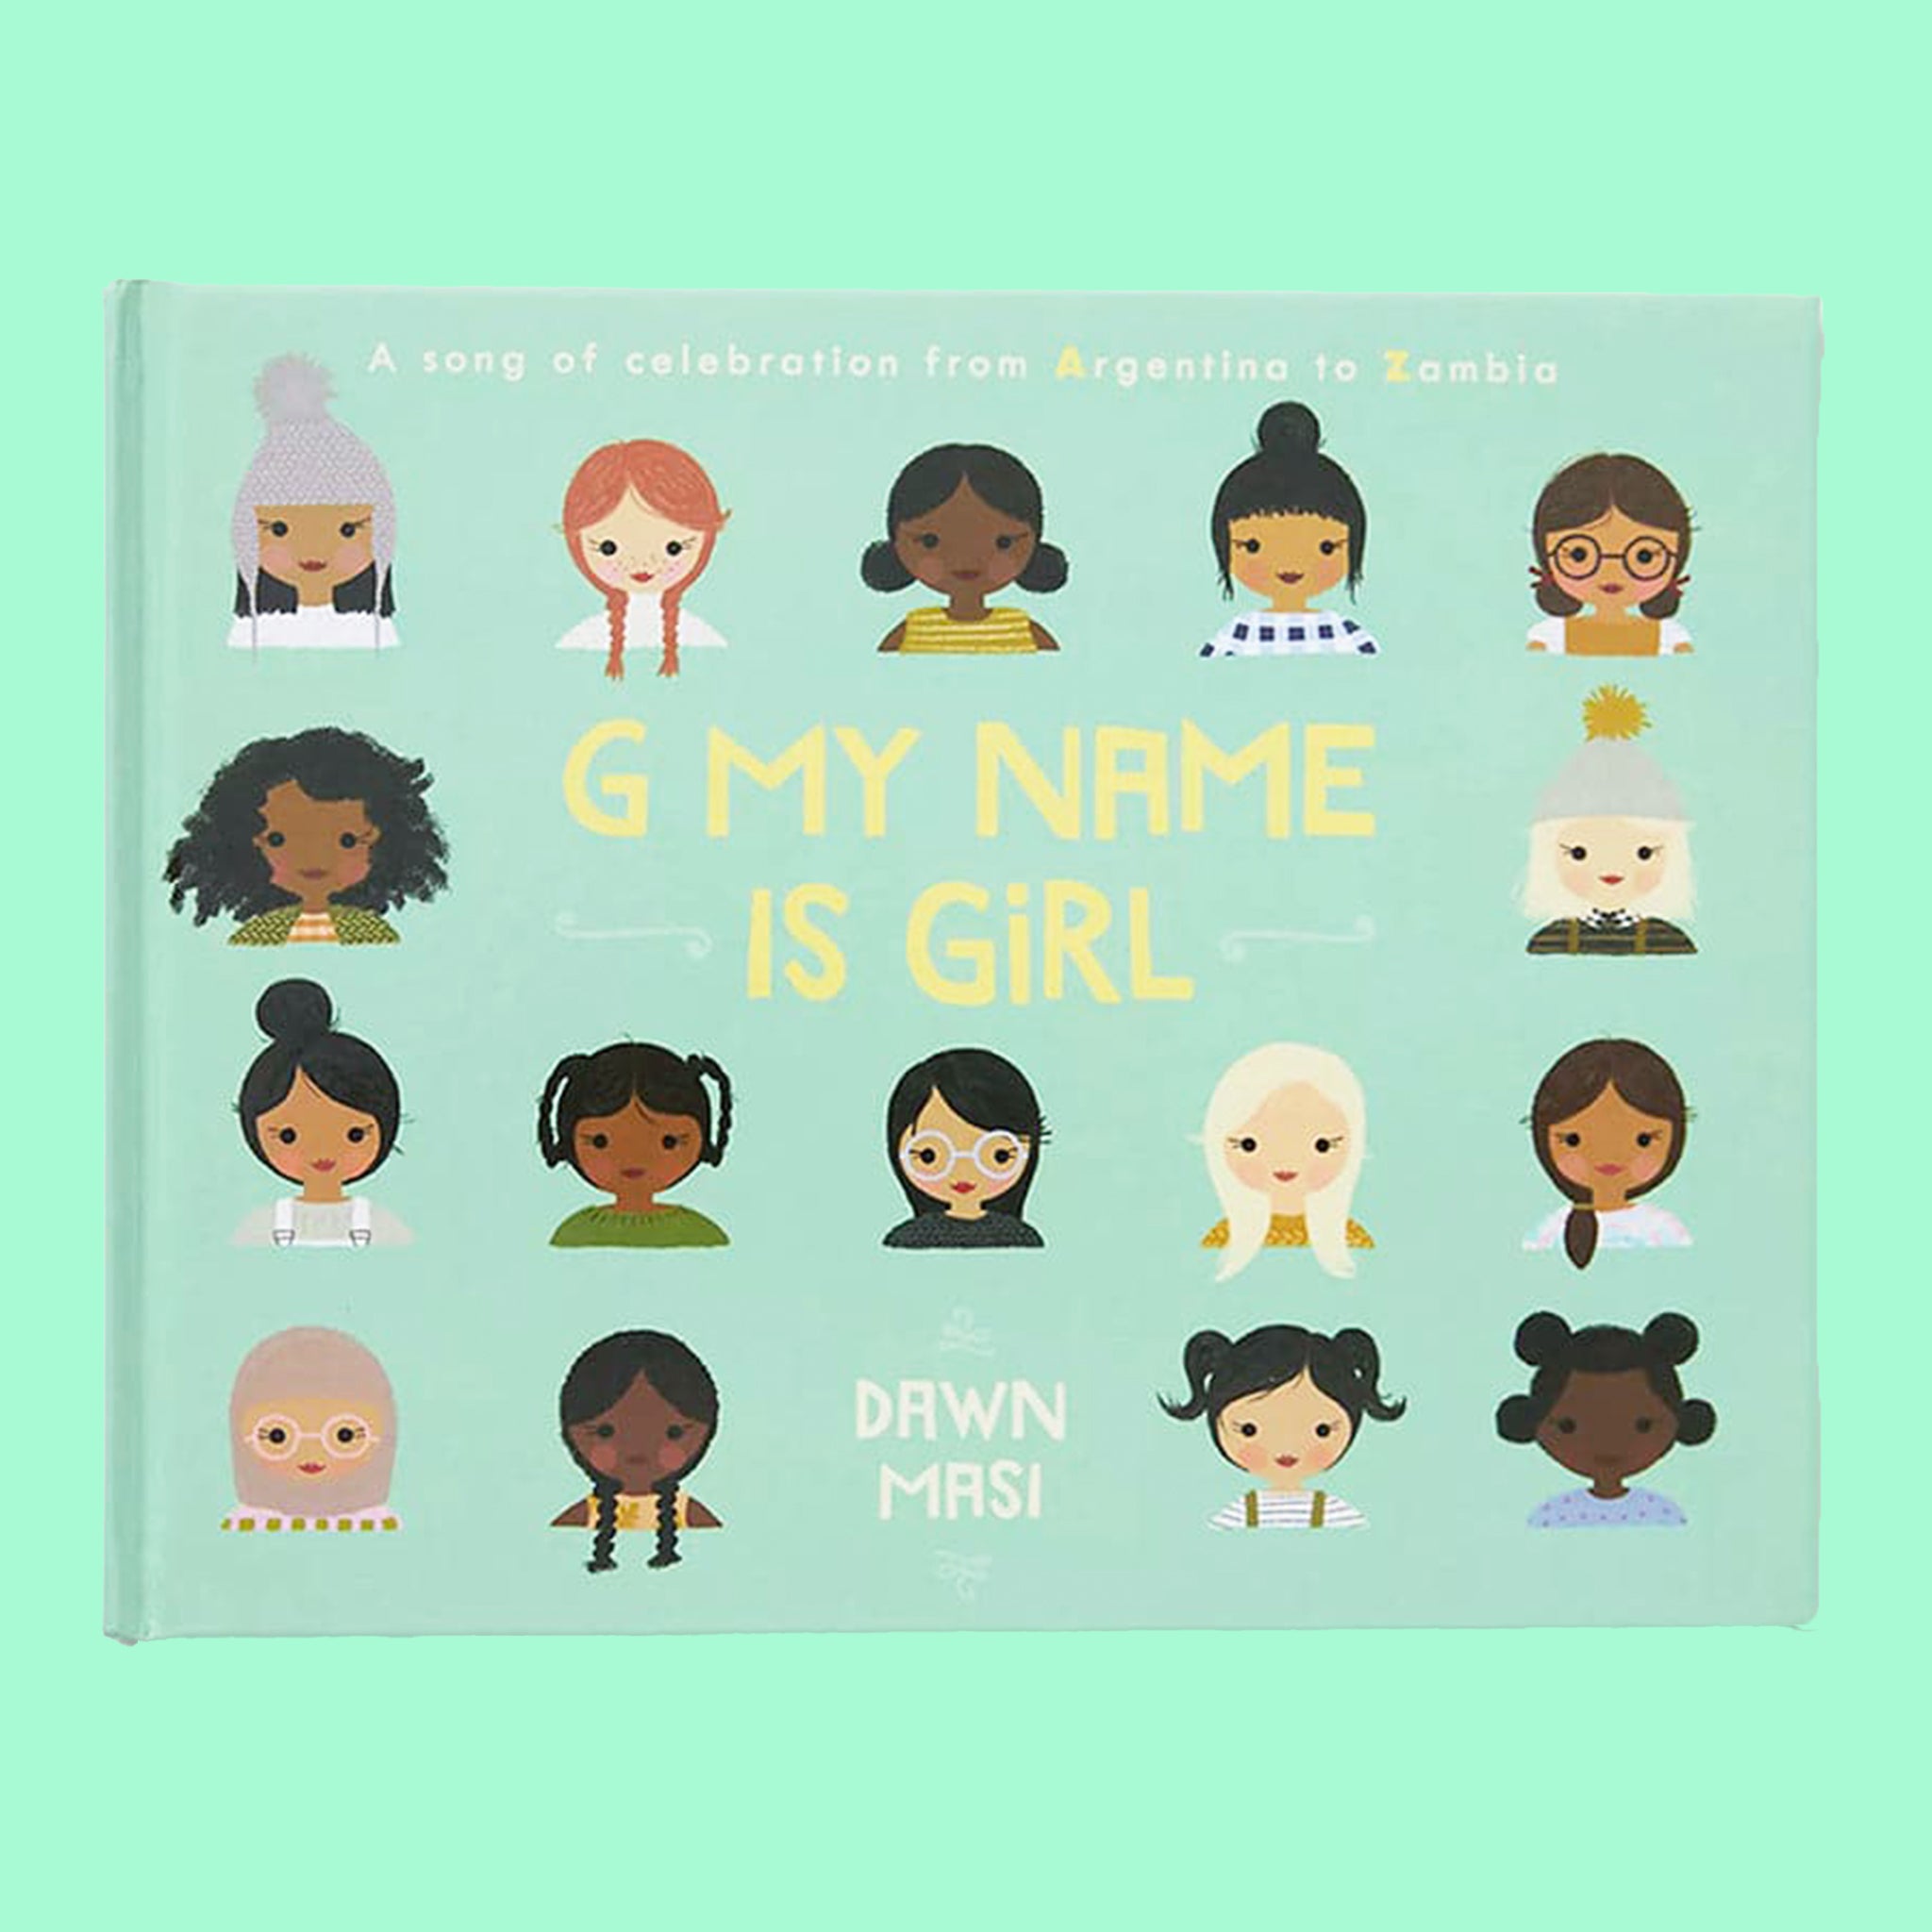 On a green background is a teal children's book cover with illustrations of all different races and ethnicities of girls along with a yellow title in the center that reads, "G My Name Is Girl"